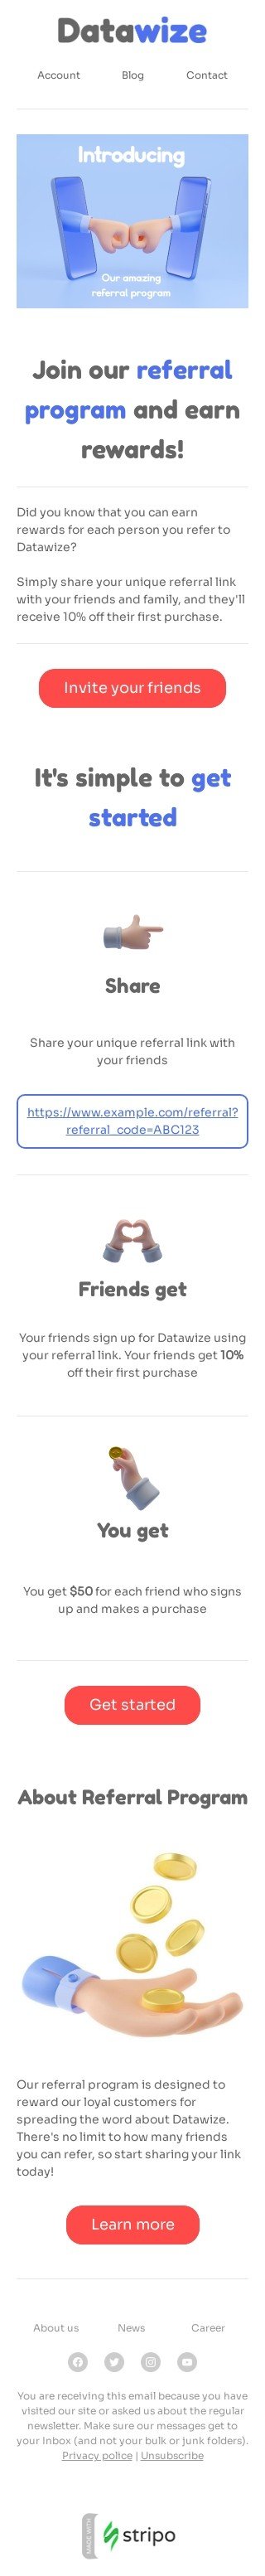 SaaS email template "Our amazing referral program" for software & technology industry mobile view